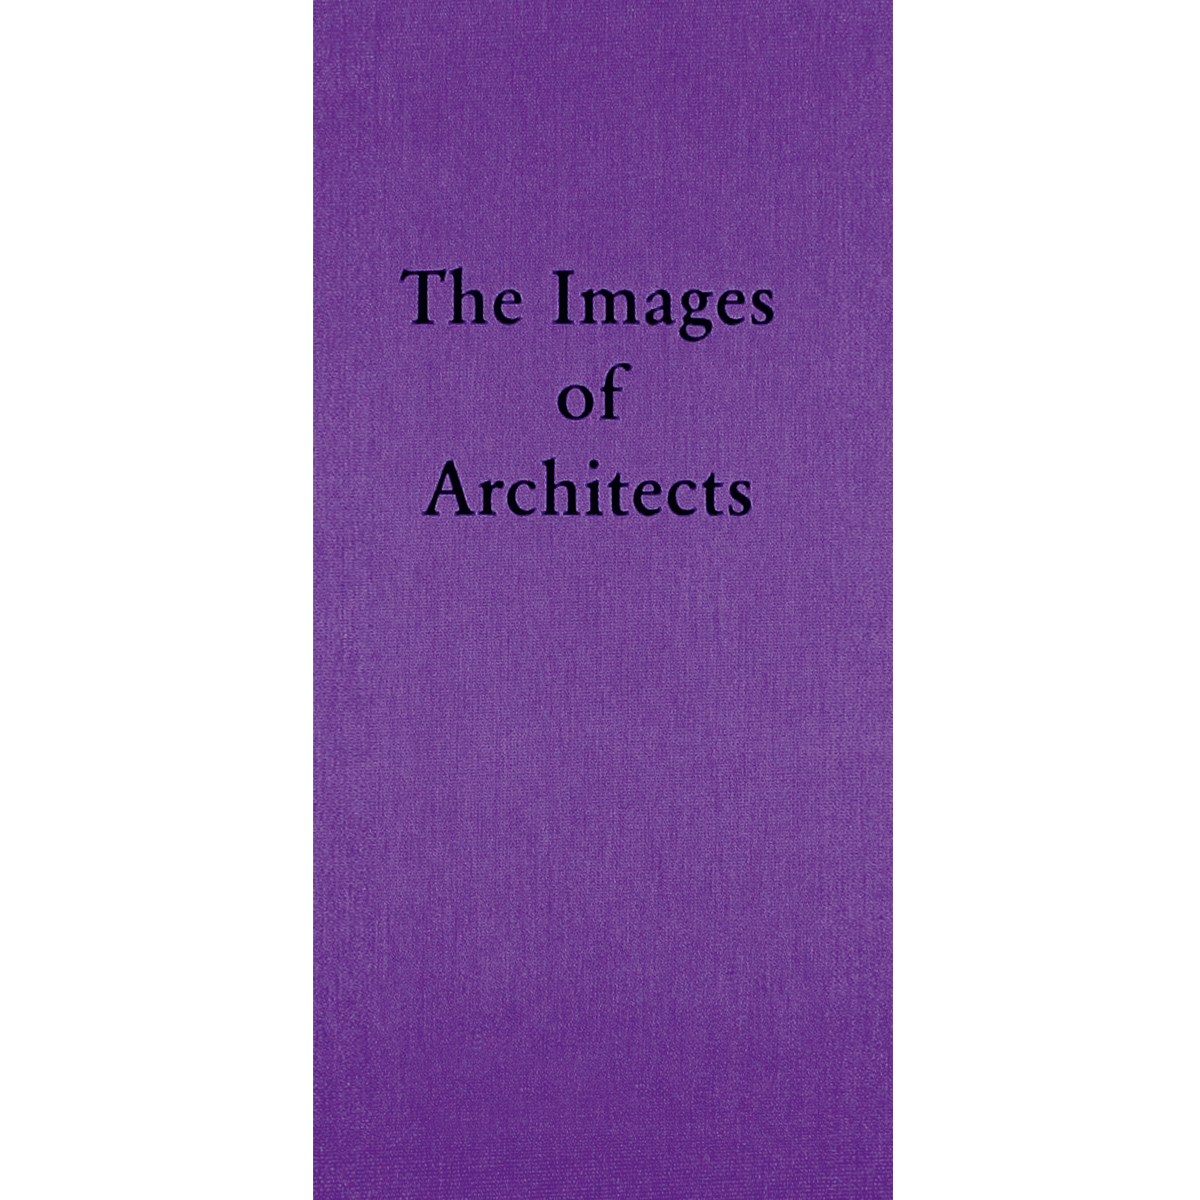 The Images of Architects